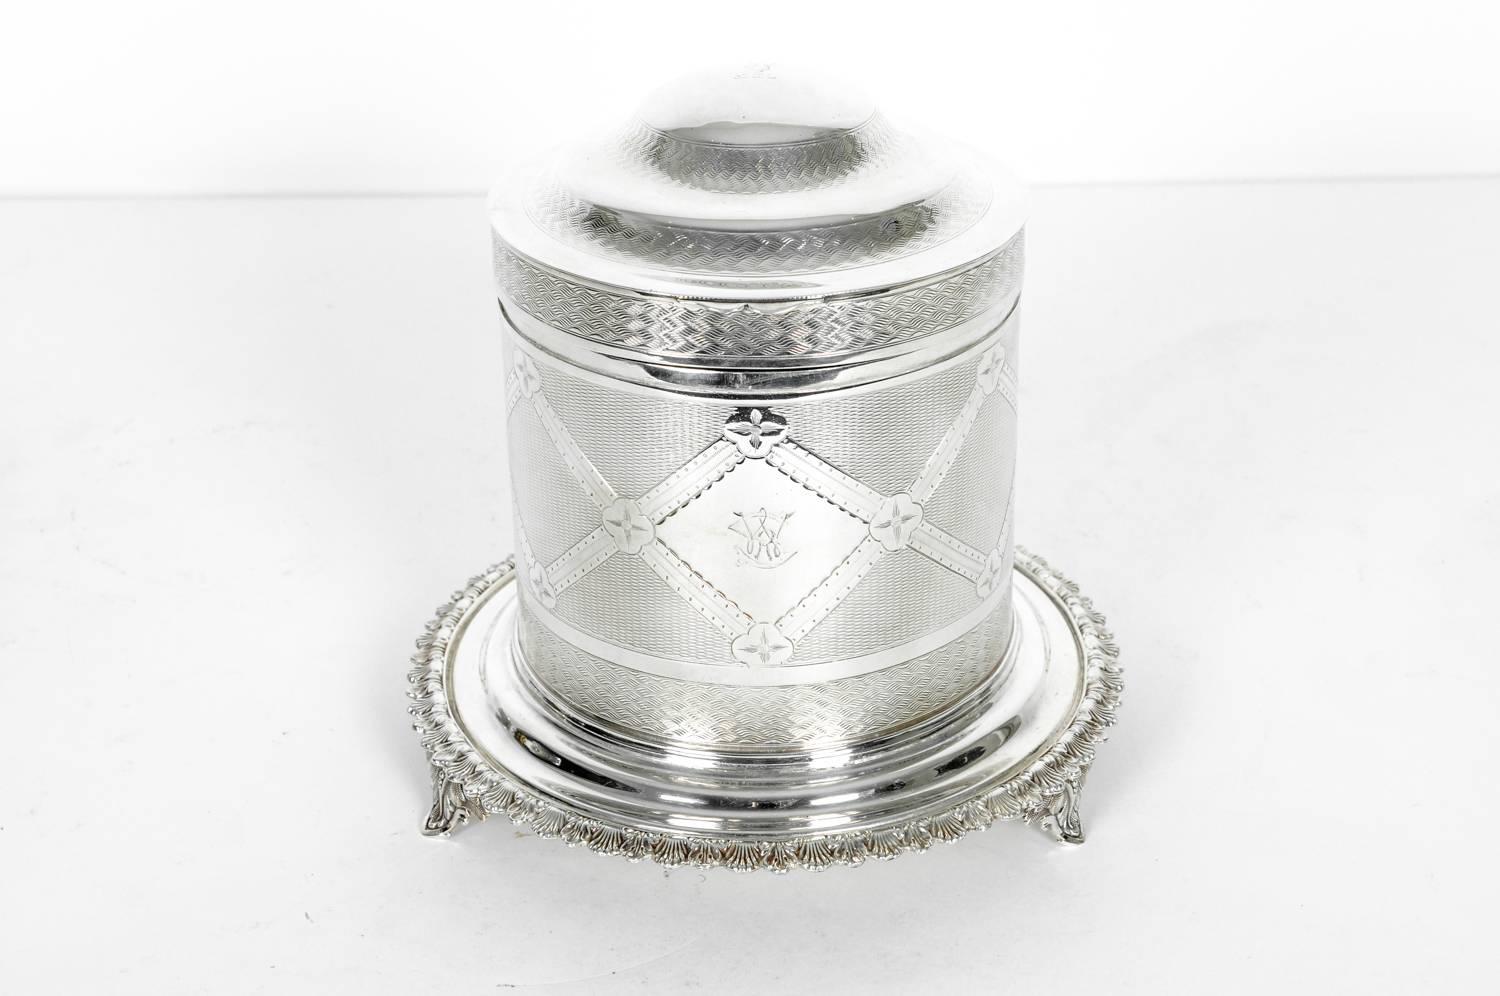 Great Britain (UK) Old English Silver Plate Biscuit Box / Tea Caddy